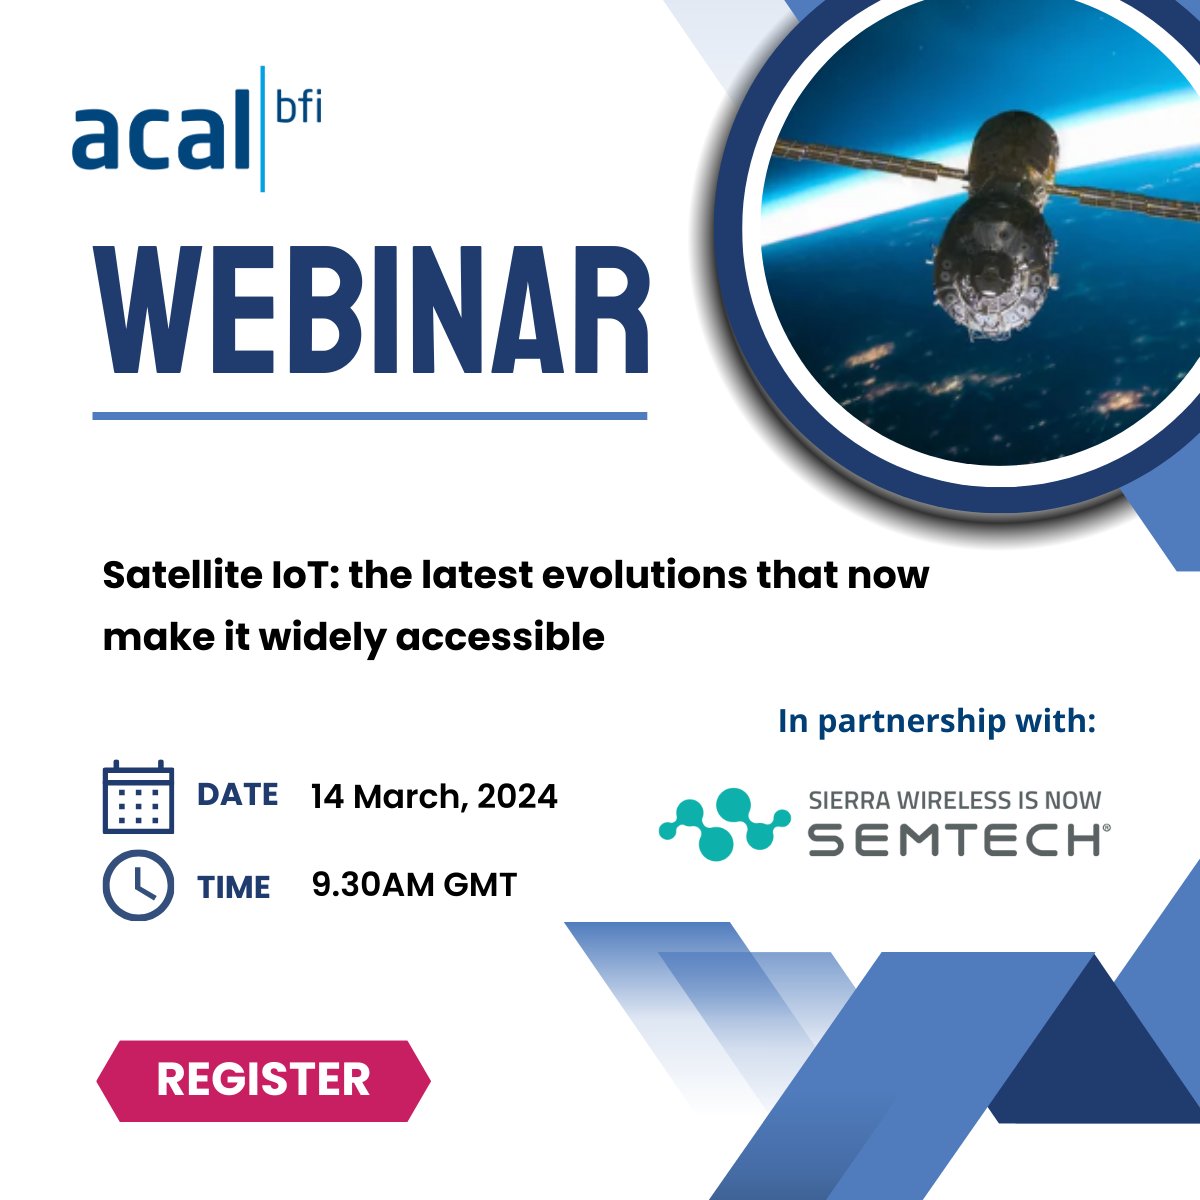 Unlock the future of IoT at our upcoming webinar in partnership with Semtech. Explore the latest evolutions in Satellite IoT technology, including 3GPP NTN & groundbreaking LoRa over satellite innovations. Register now: bit.ly/3wGJPRl #IoT #Satellite #Webinar #Innovation